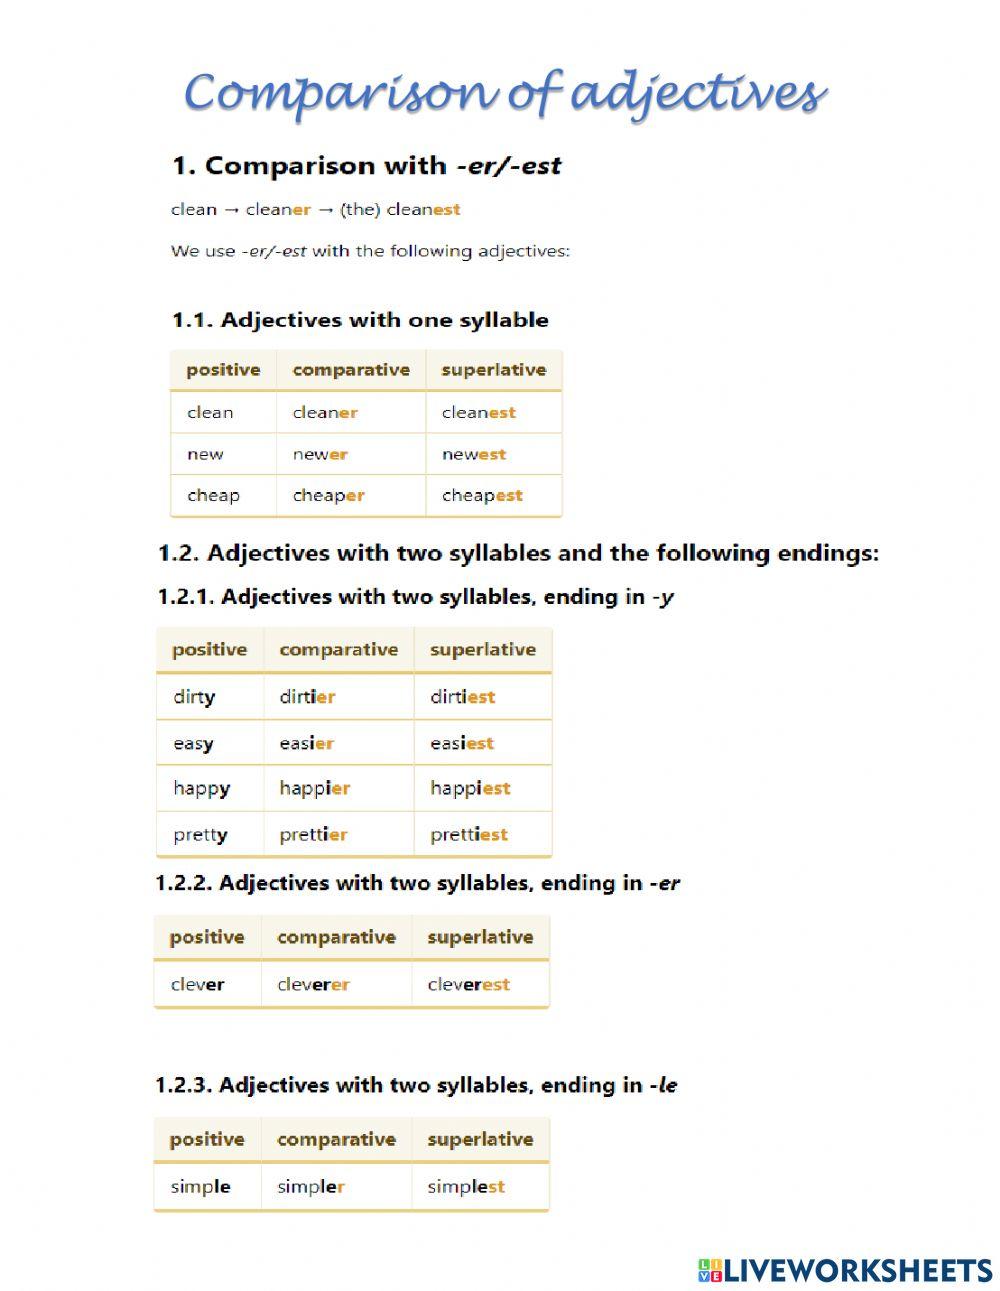 Comparison of adjectives